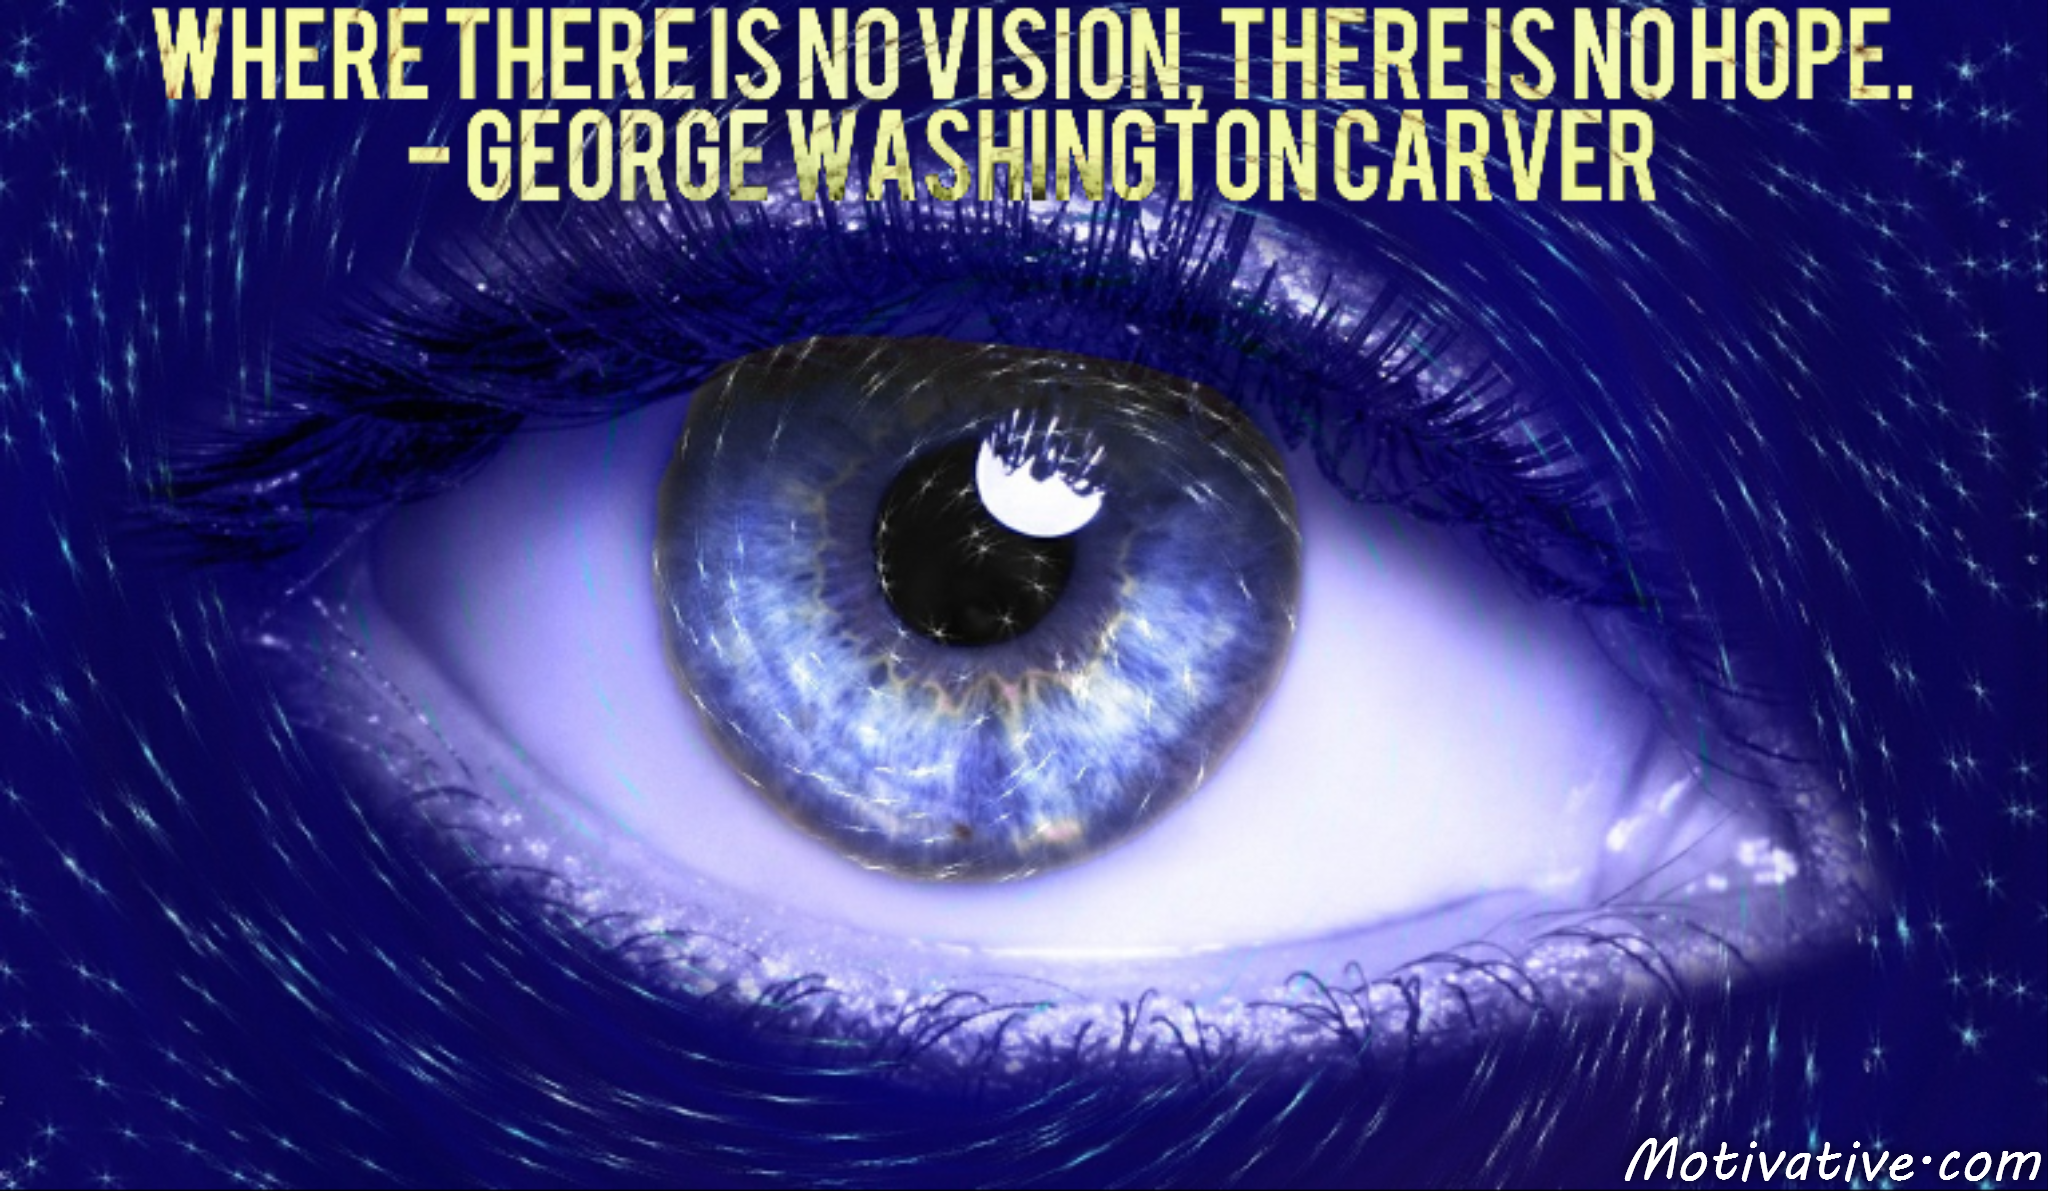 Where there is no vision, there is no hope. – George Washington Carver